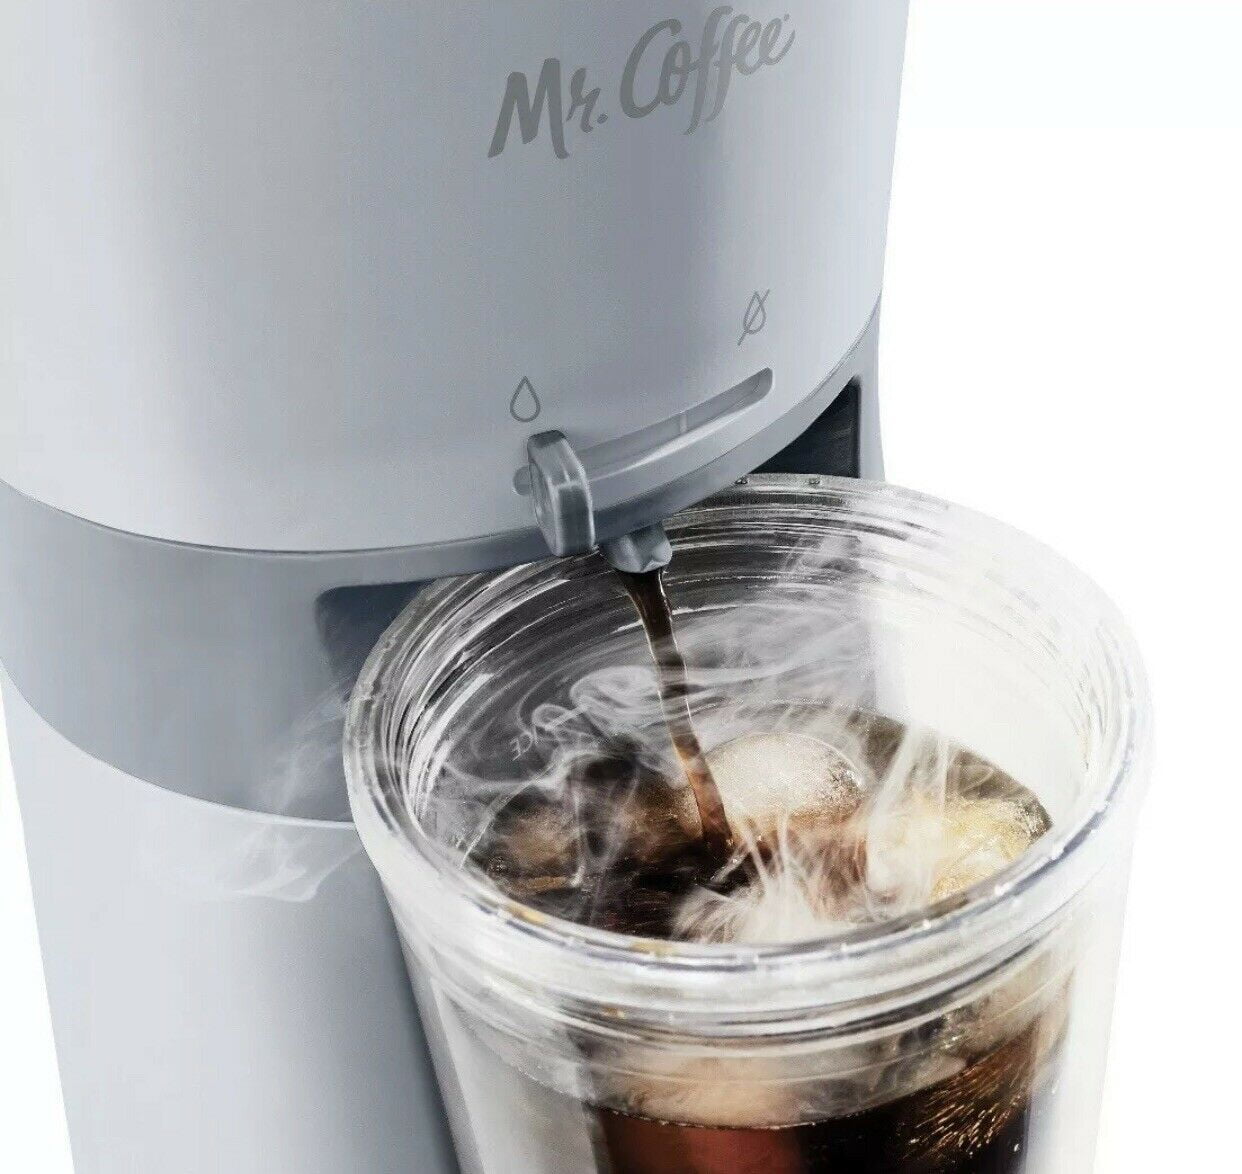 Coffee Iced Coffee Maker with Reusable Tumbler and Coffee Filter NEW White Mr